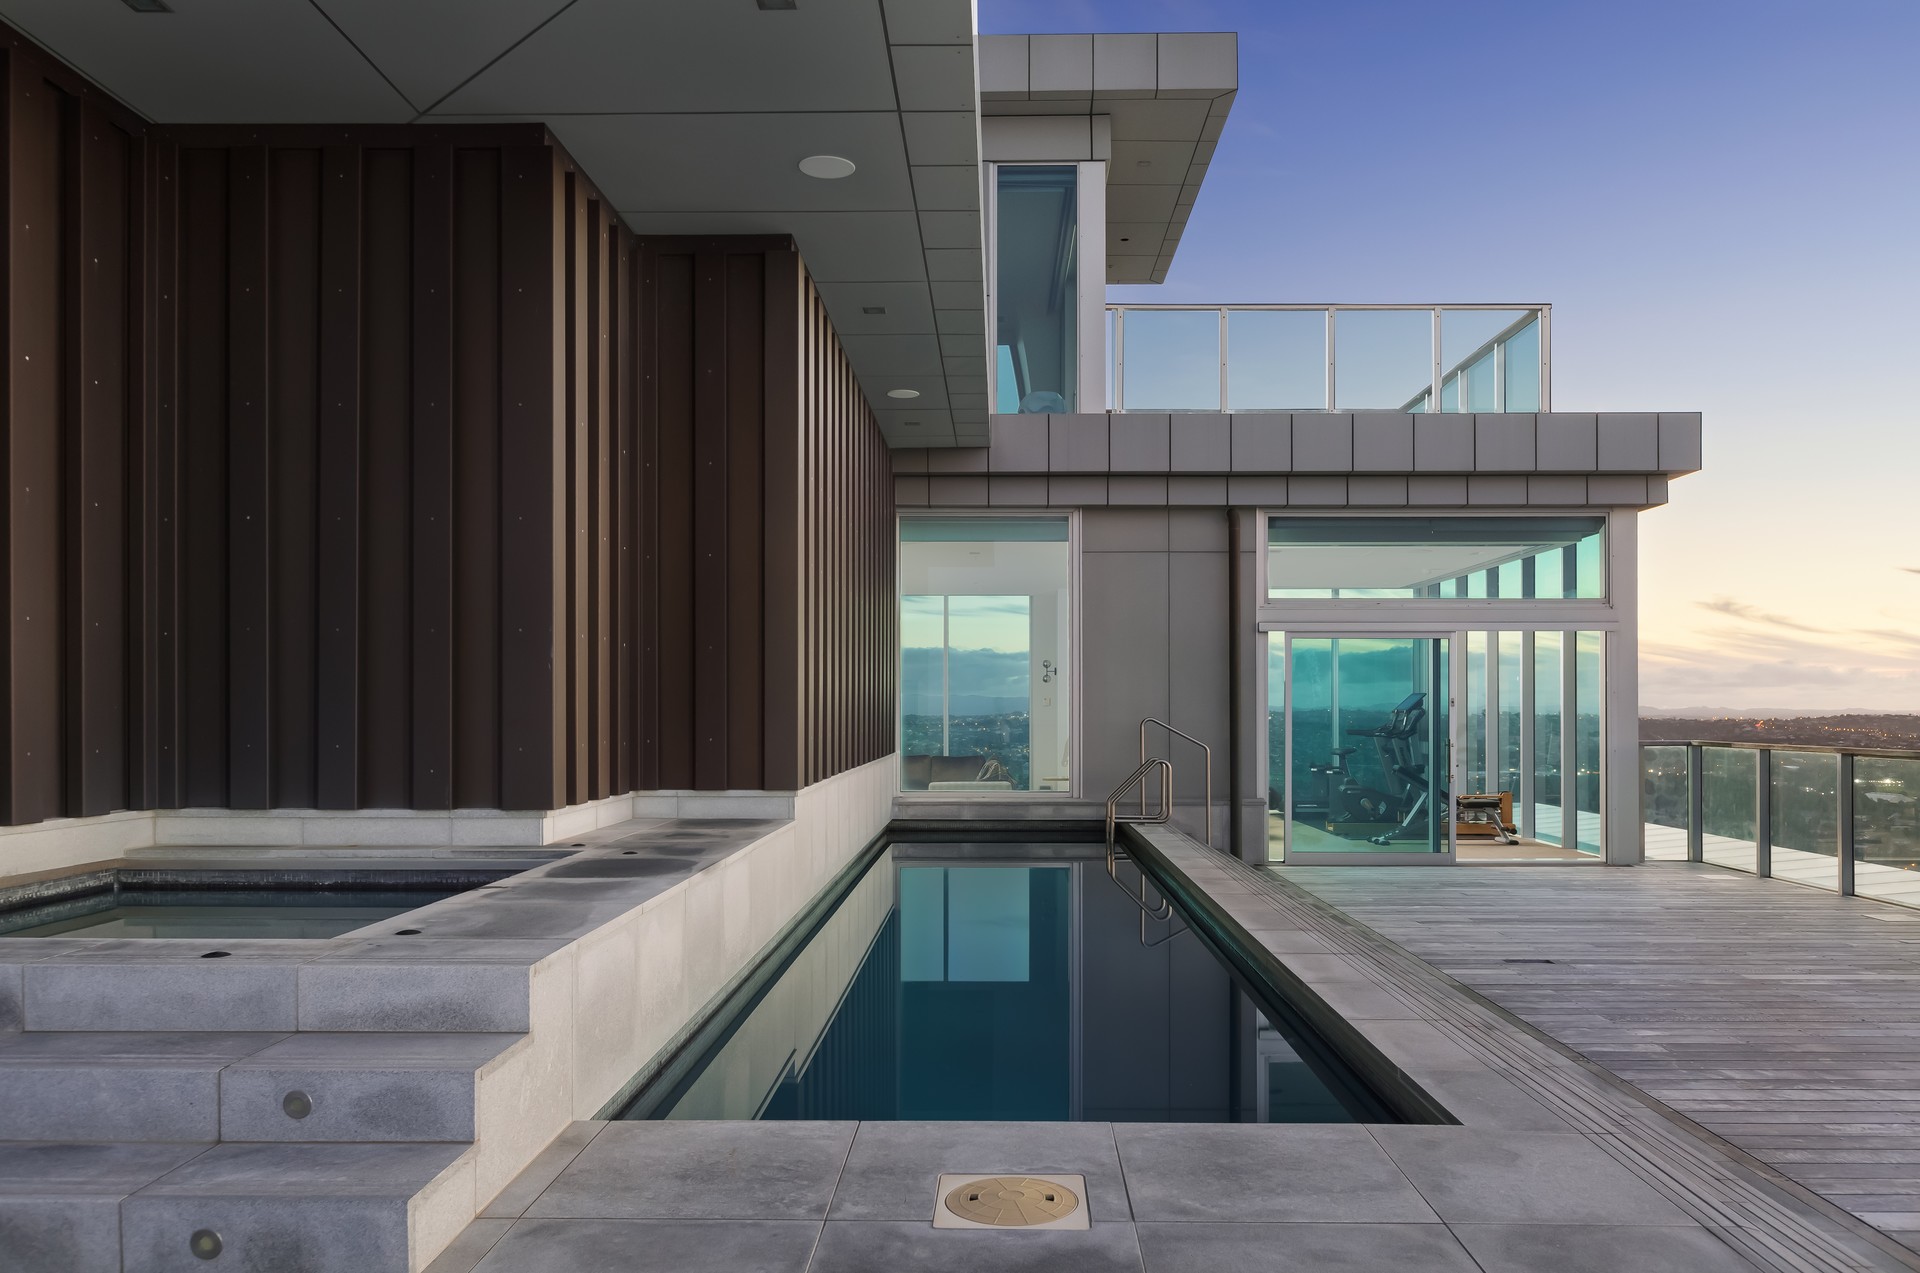 #9844 - PRIZED TROPHY PENTHOUSE | AMERICAS CUP STAGE - Premium Real Estate